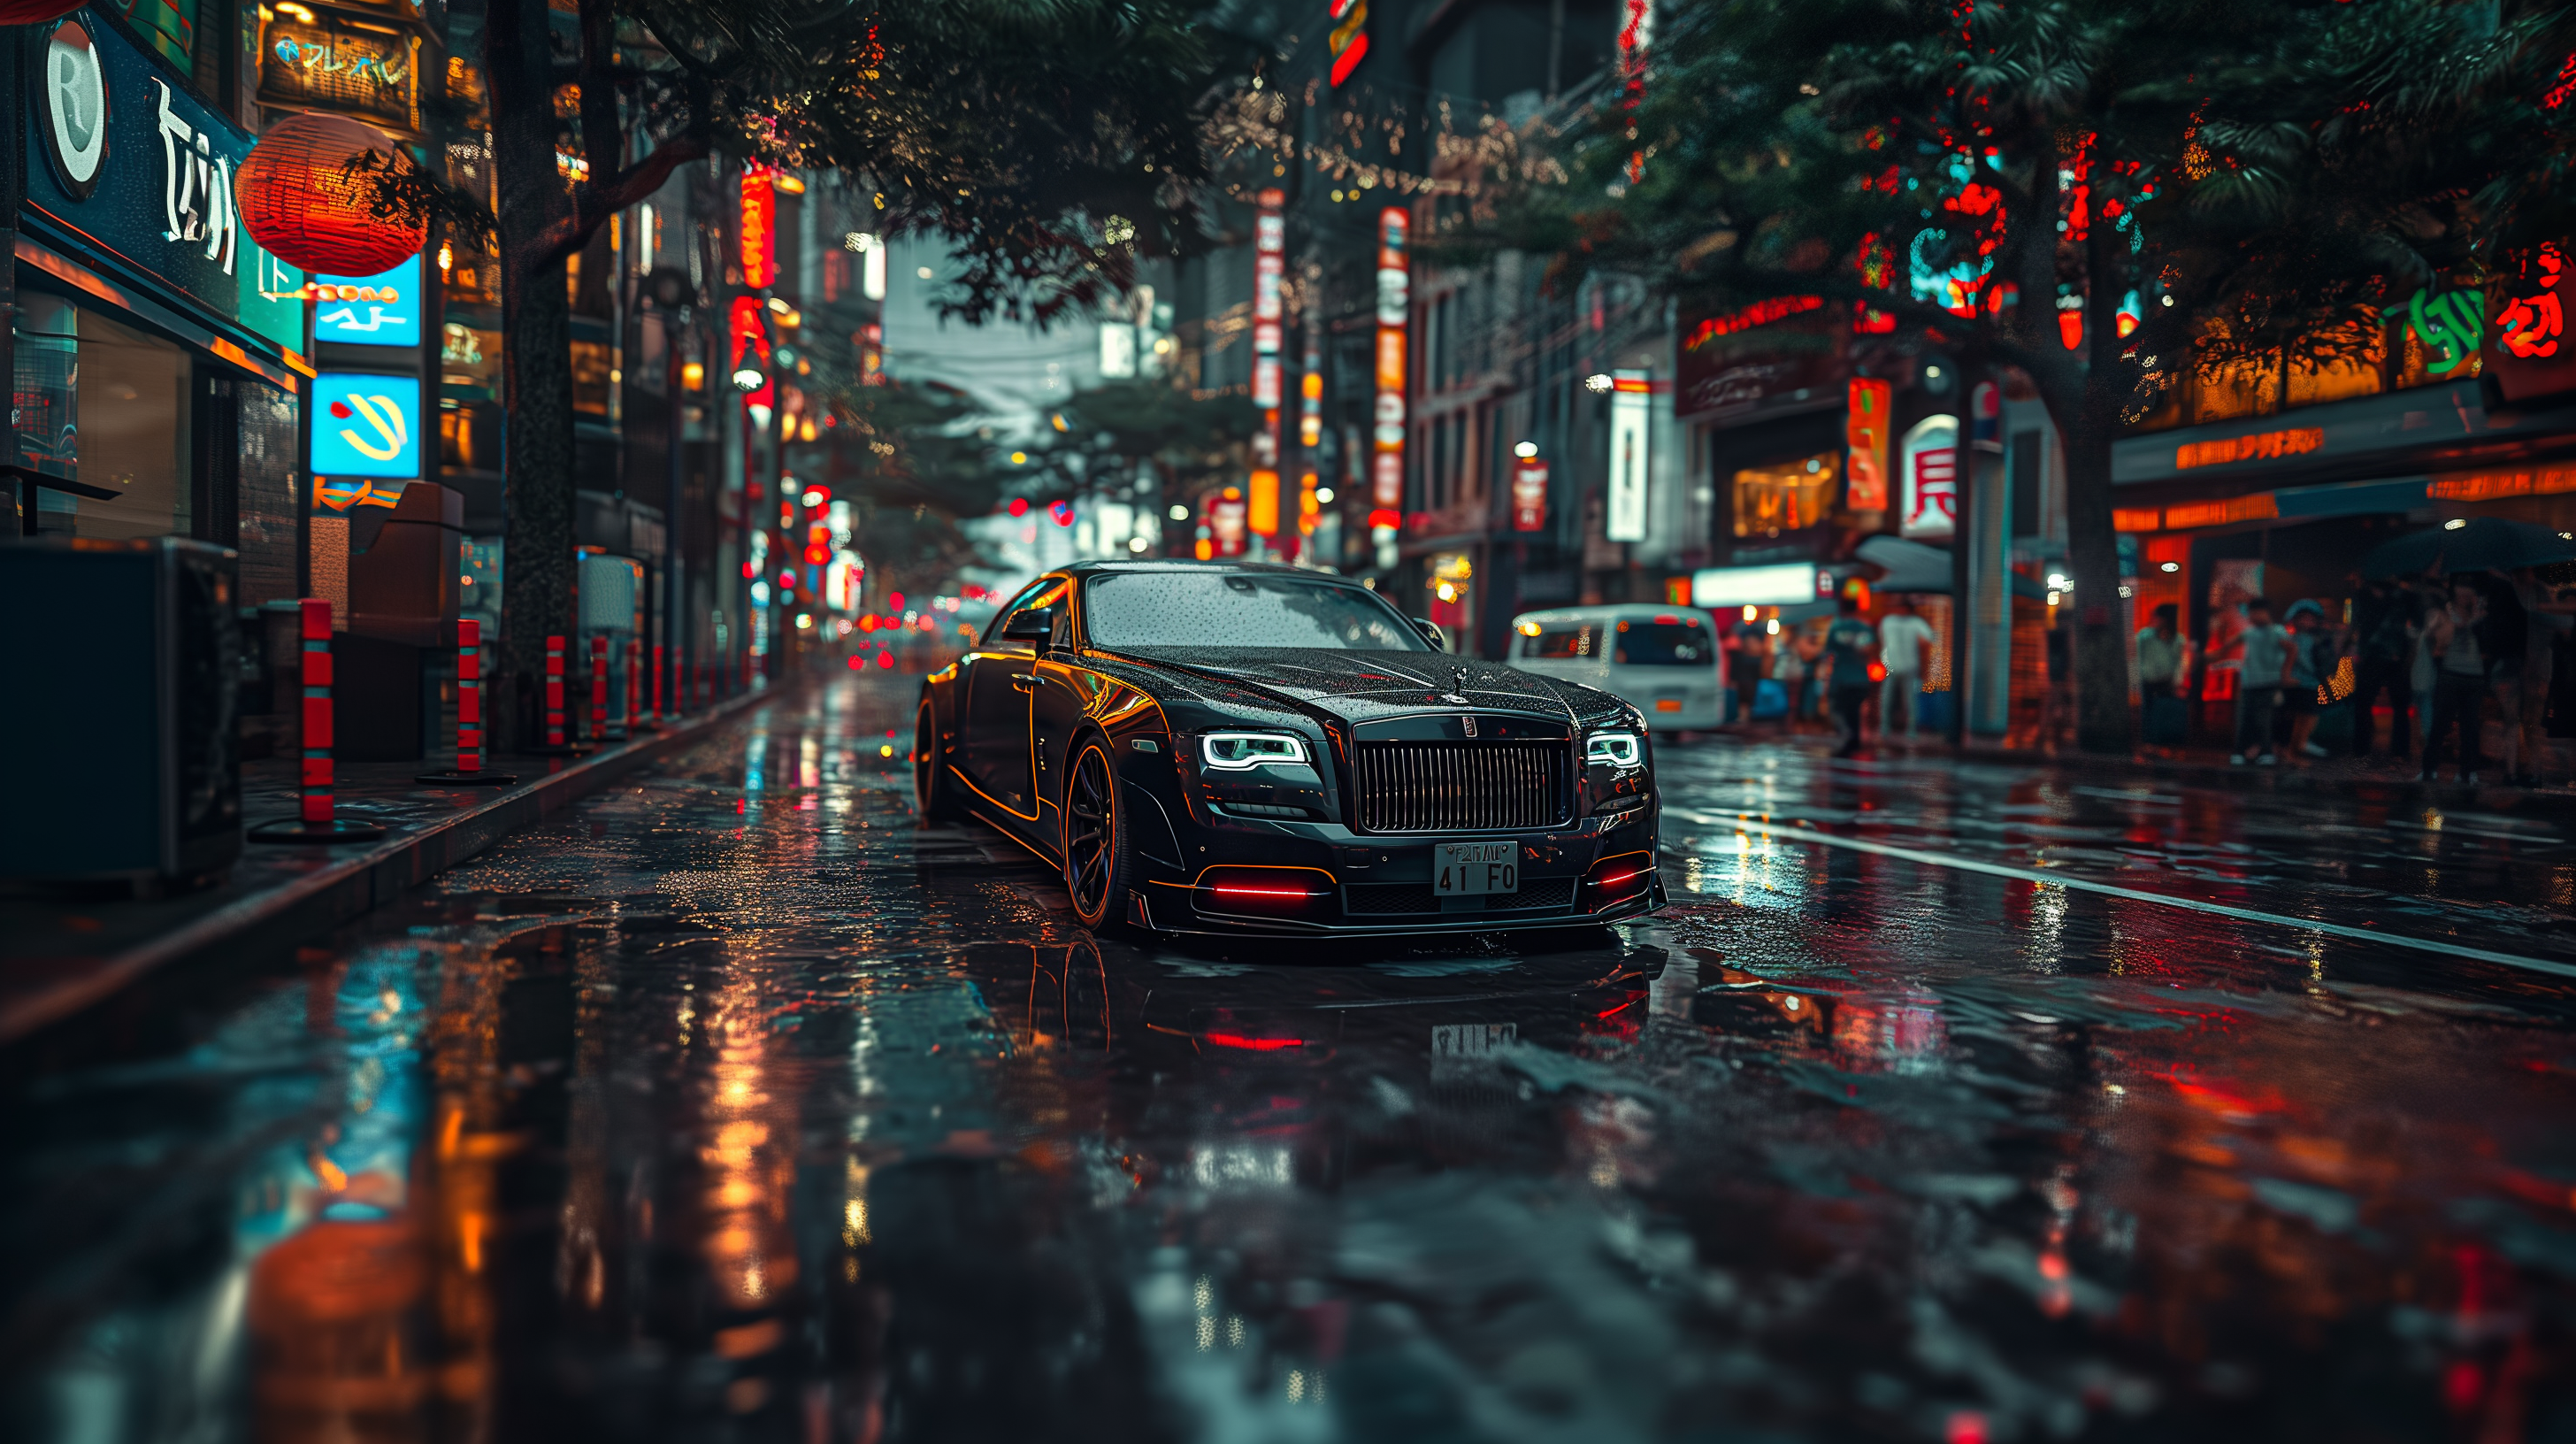 General 2912x1632 car Rolls Royce Wraith AI art cyberpunk frontal view headlights vehicle depth of field trees sign building city lights reflection people road wet wet road